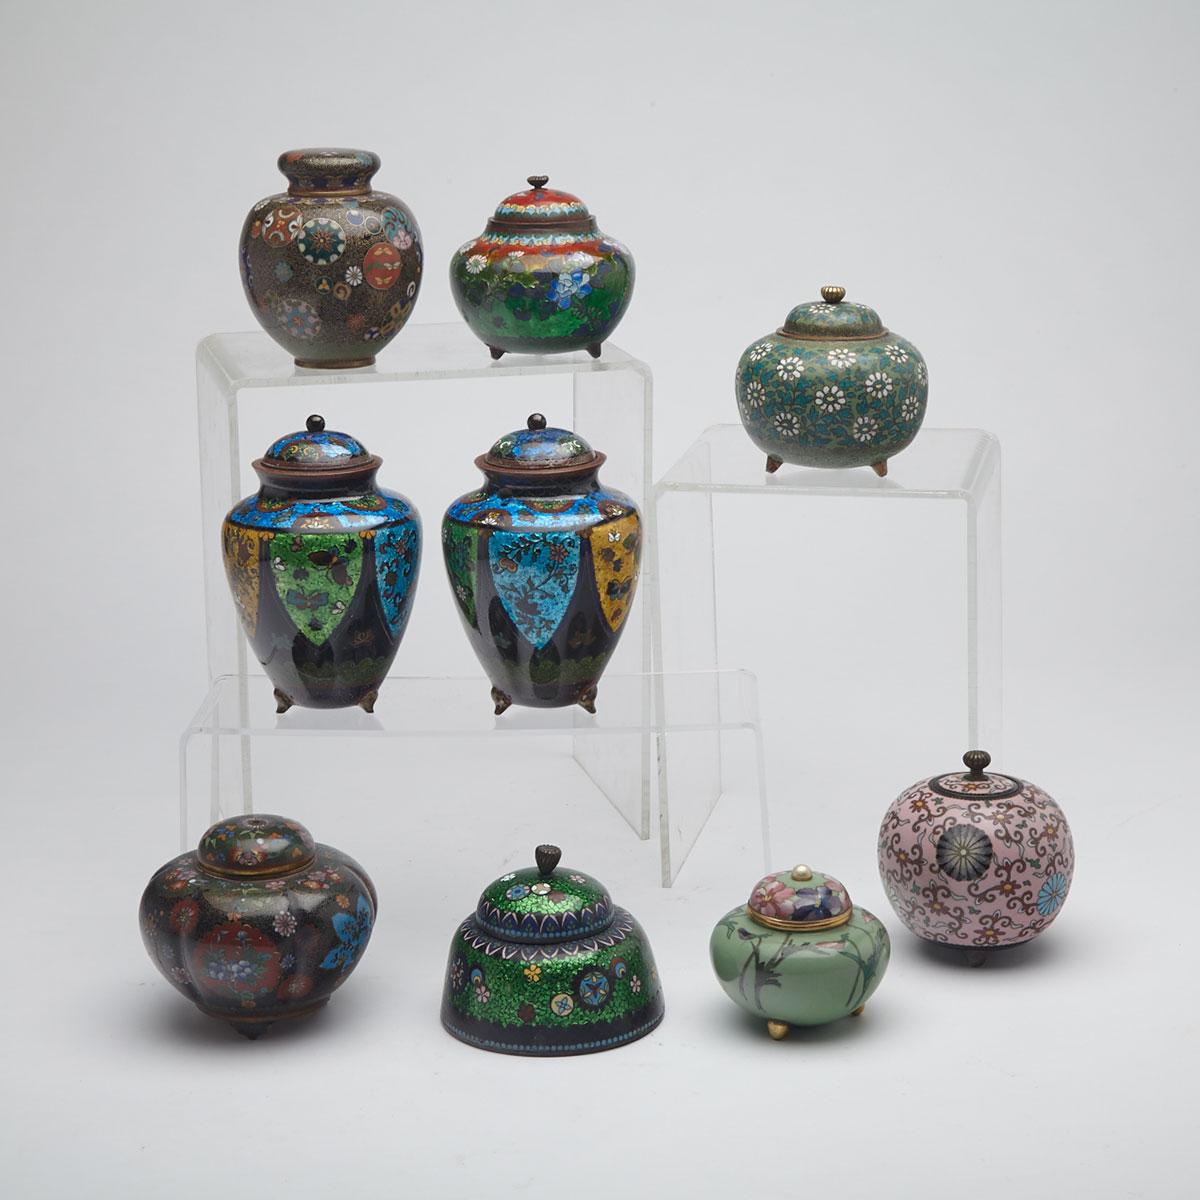 Group of Nine Cloisonné Enamel Covered Vessels, Japan, Early 20th Century